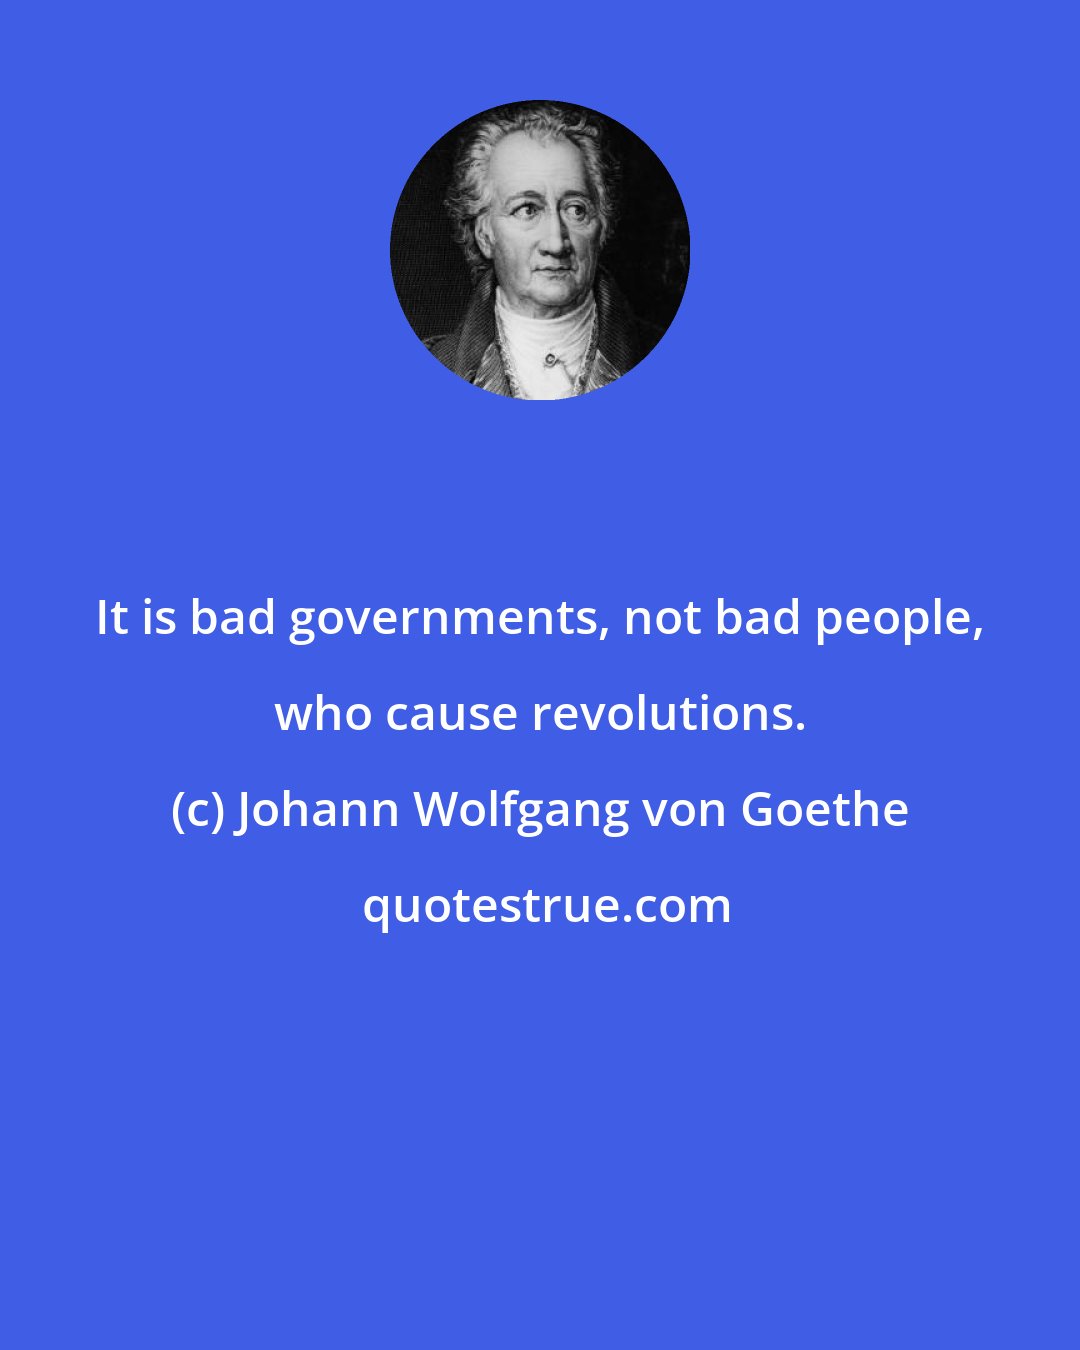 Johann Wolfgang von Goethe: It is bad governments, not bad people, who cause revolutions.